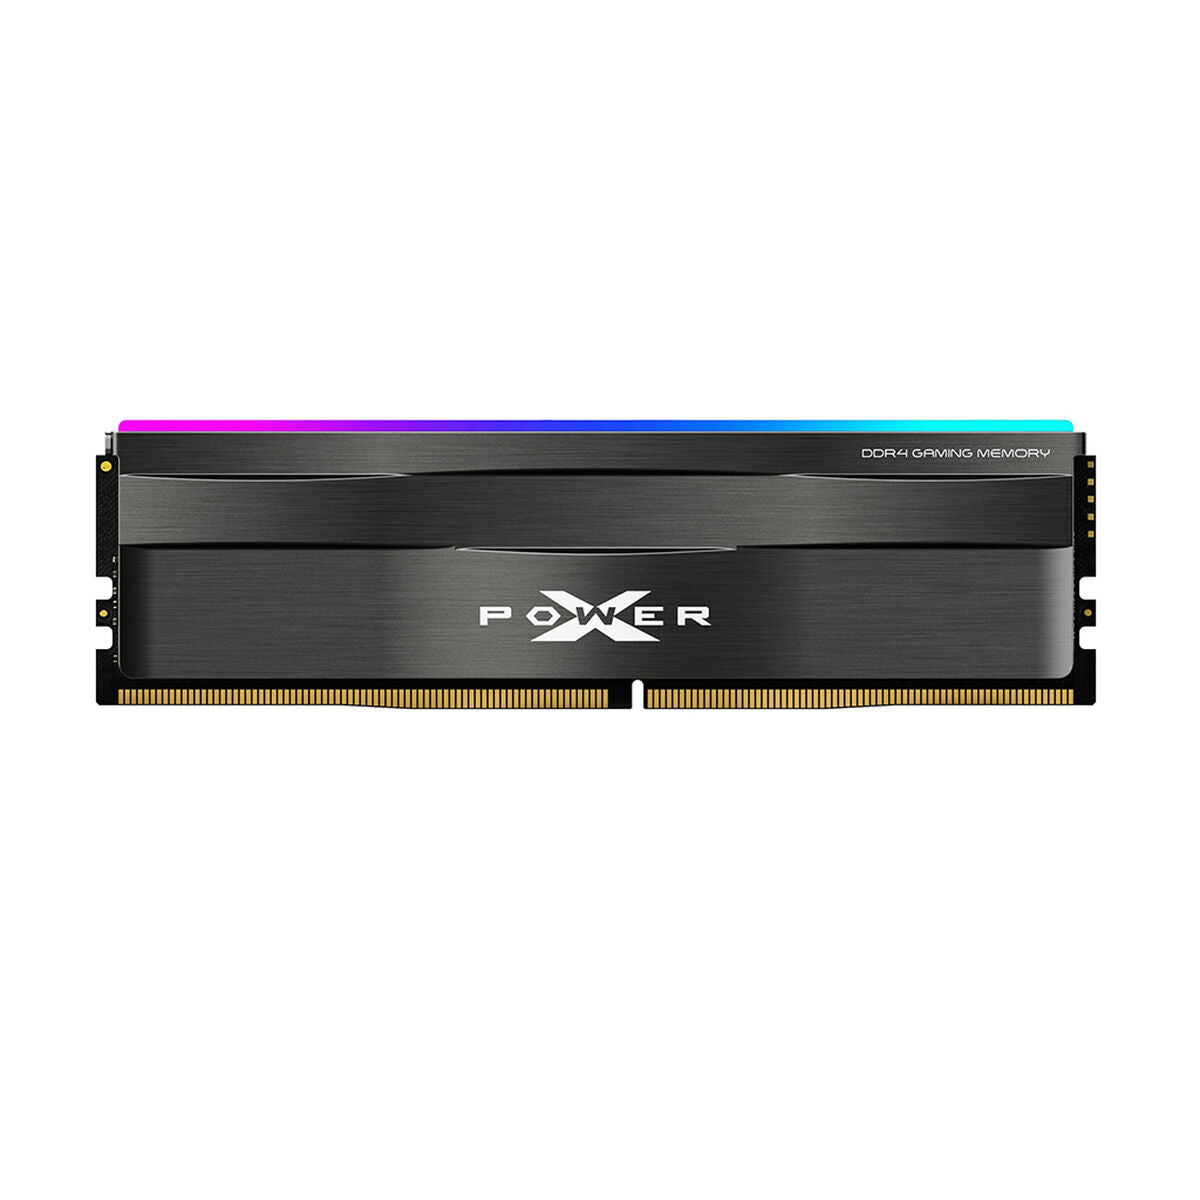 RAM Memory Silicon Power SP032GXLZU320BDD DDR4 DDR4-SDRAM CL18 32 GB, Silicon Power, Computing, Components, ram-memory-silicon-power-sp032gxlzu320bdd-ddr4-ddr4-sdram-cl18-32-gb, Brand_Silicon Power, category-reference-2609, category-reference-2803, category-reference-2807, category-reference-t-19685, category-reference-t-19912, category-reference-t-21360, computers / components, Condition_NEW, Price_100 - 200, Teleworking, RiotNook